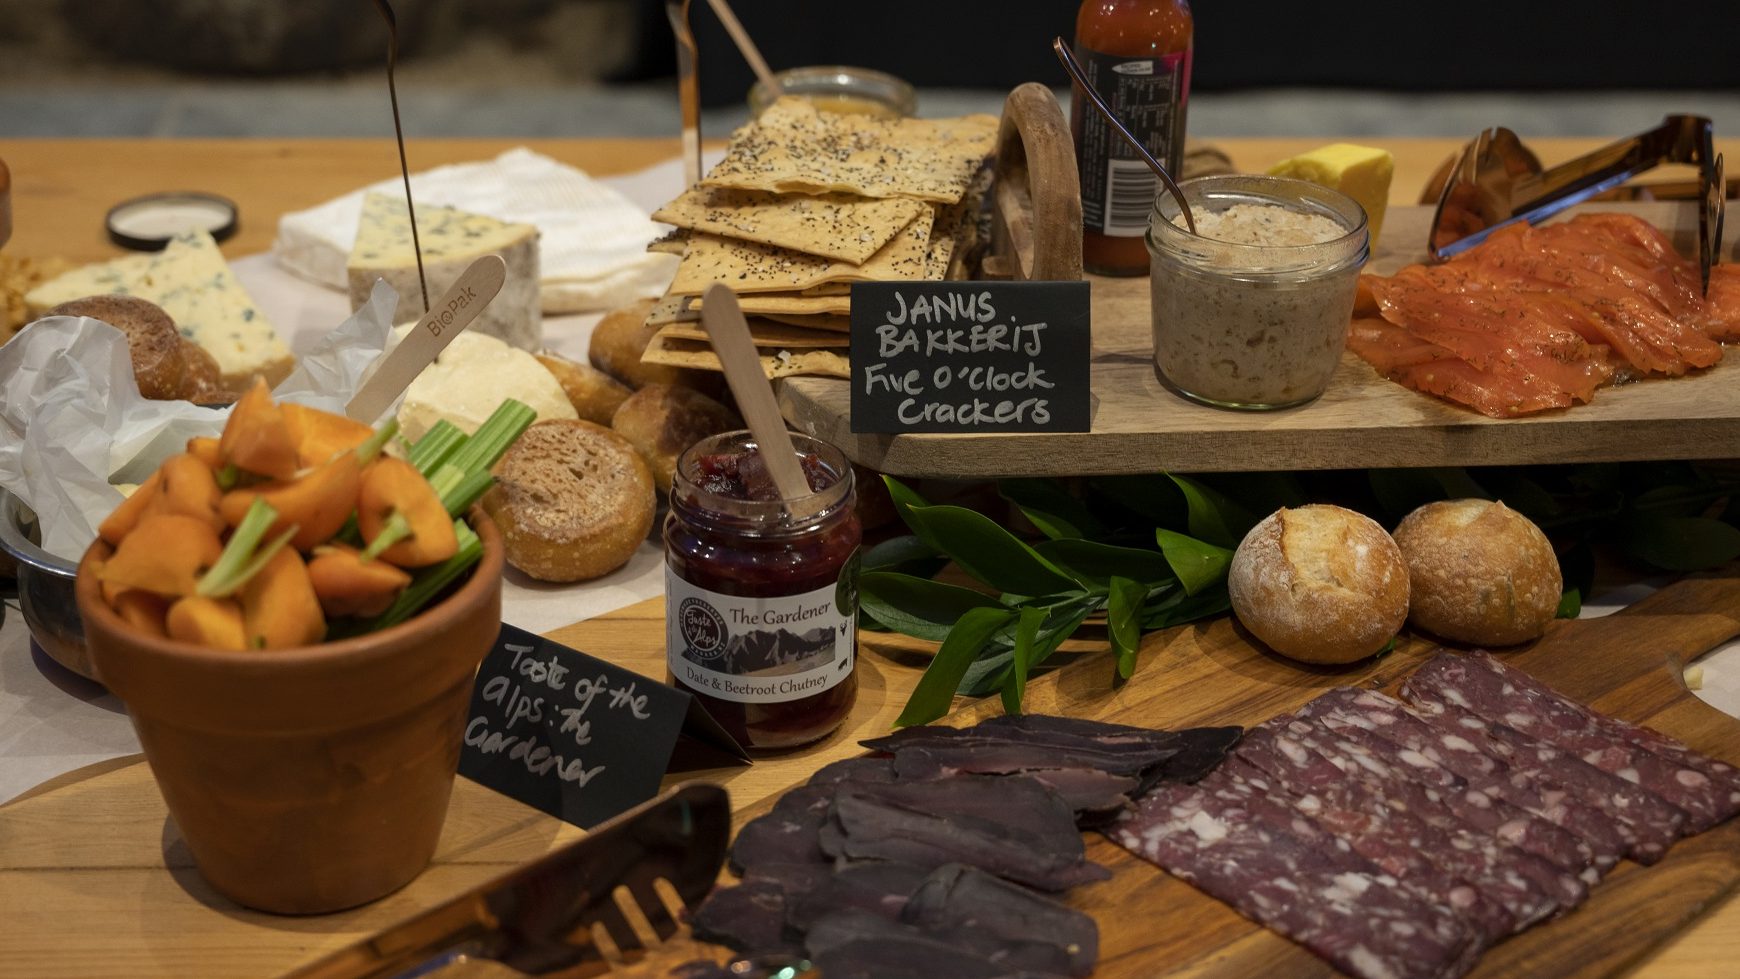 A selection of fine NZ-made delicacies featuring cheese, charcuterie, dips, smoked salmon, crackers etc...displayed on a wooden table.